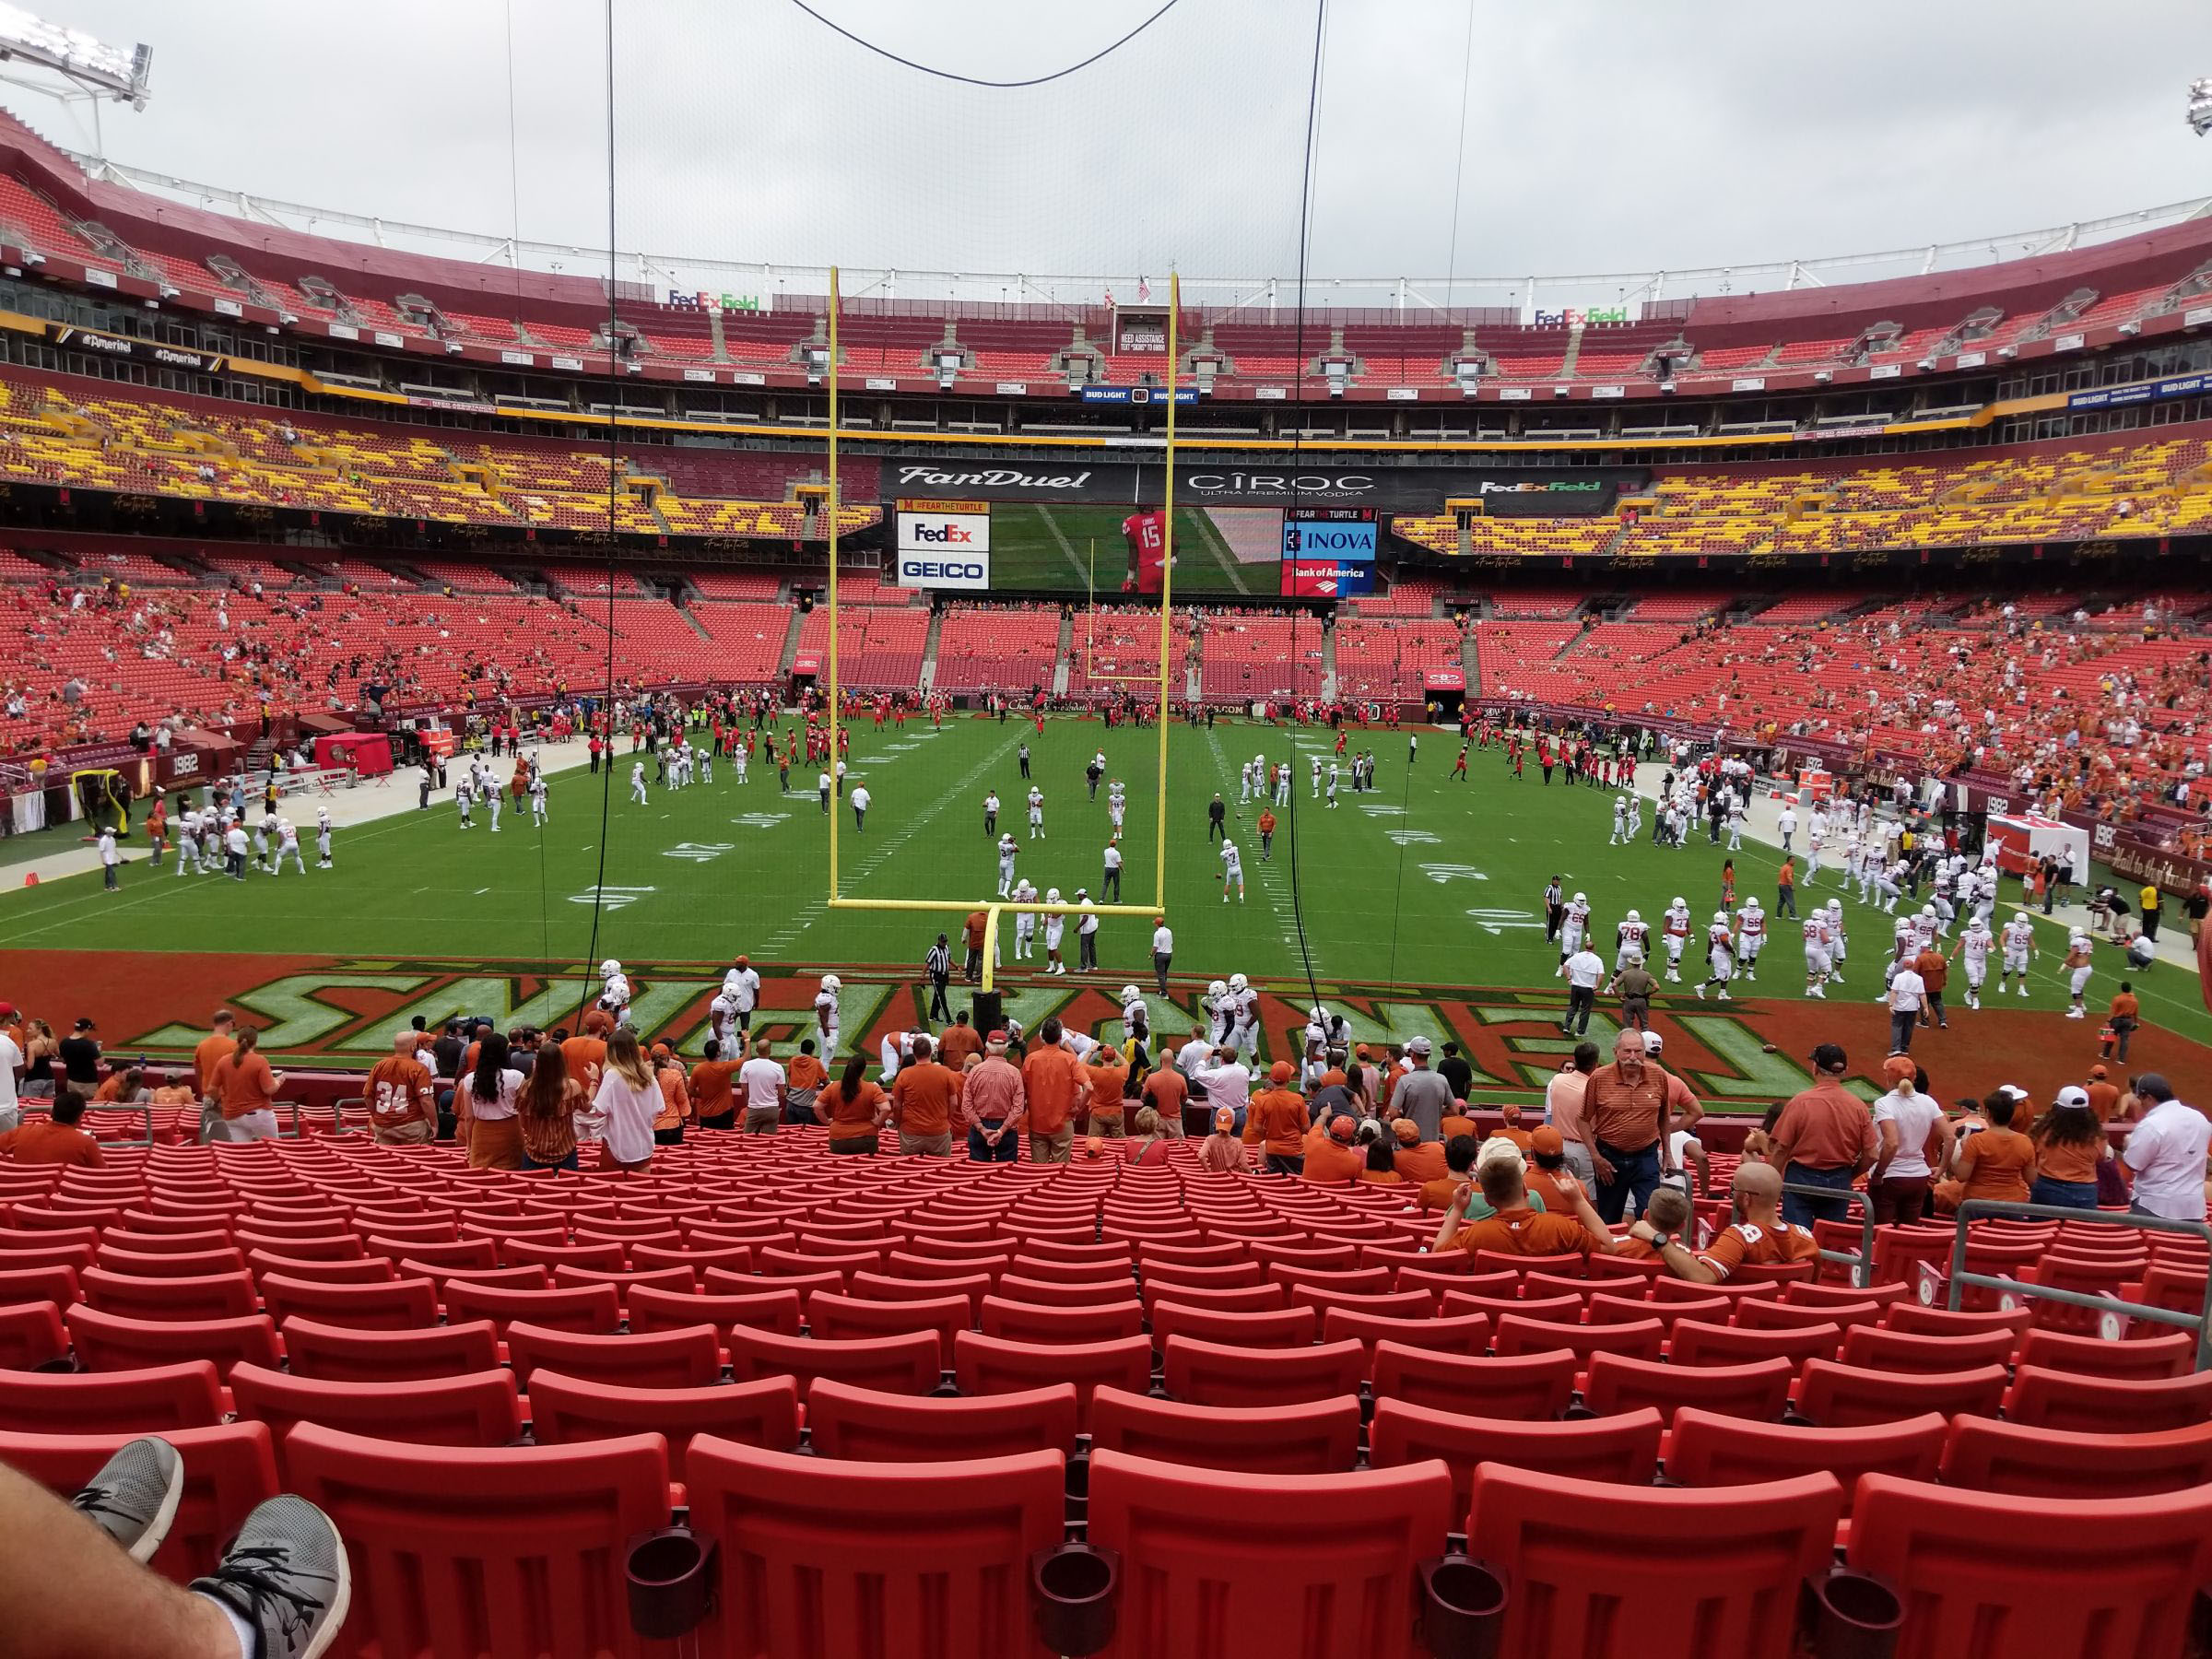 section 132, row 28 seat view  - fedexfield